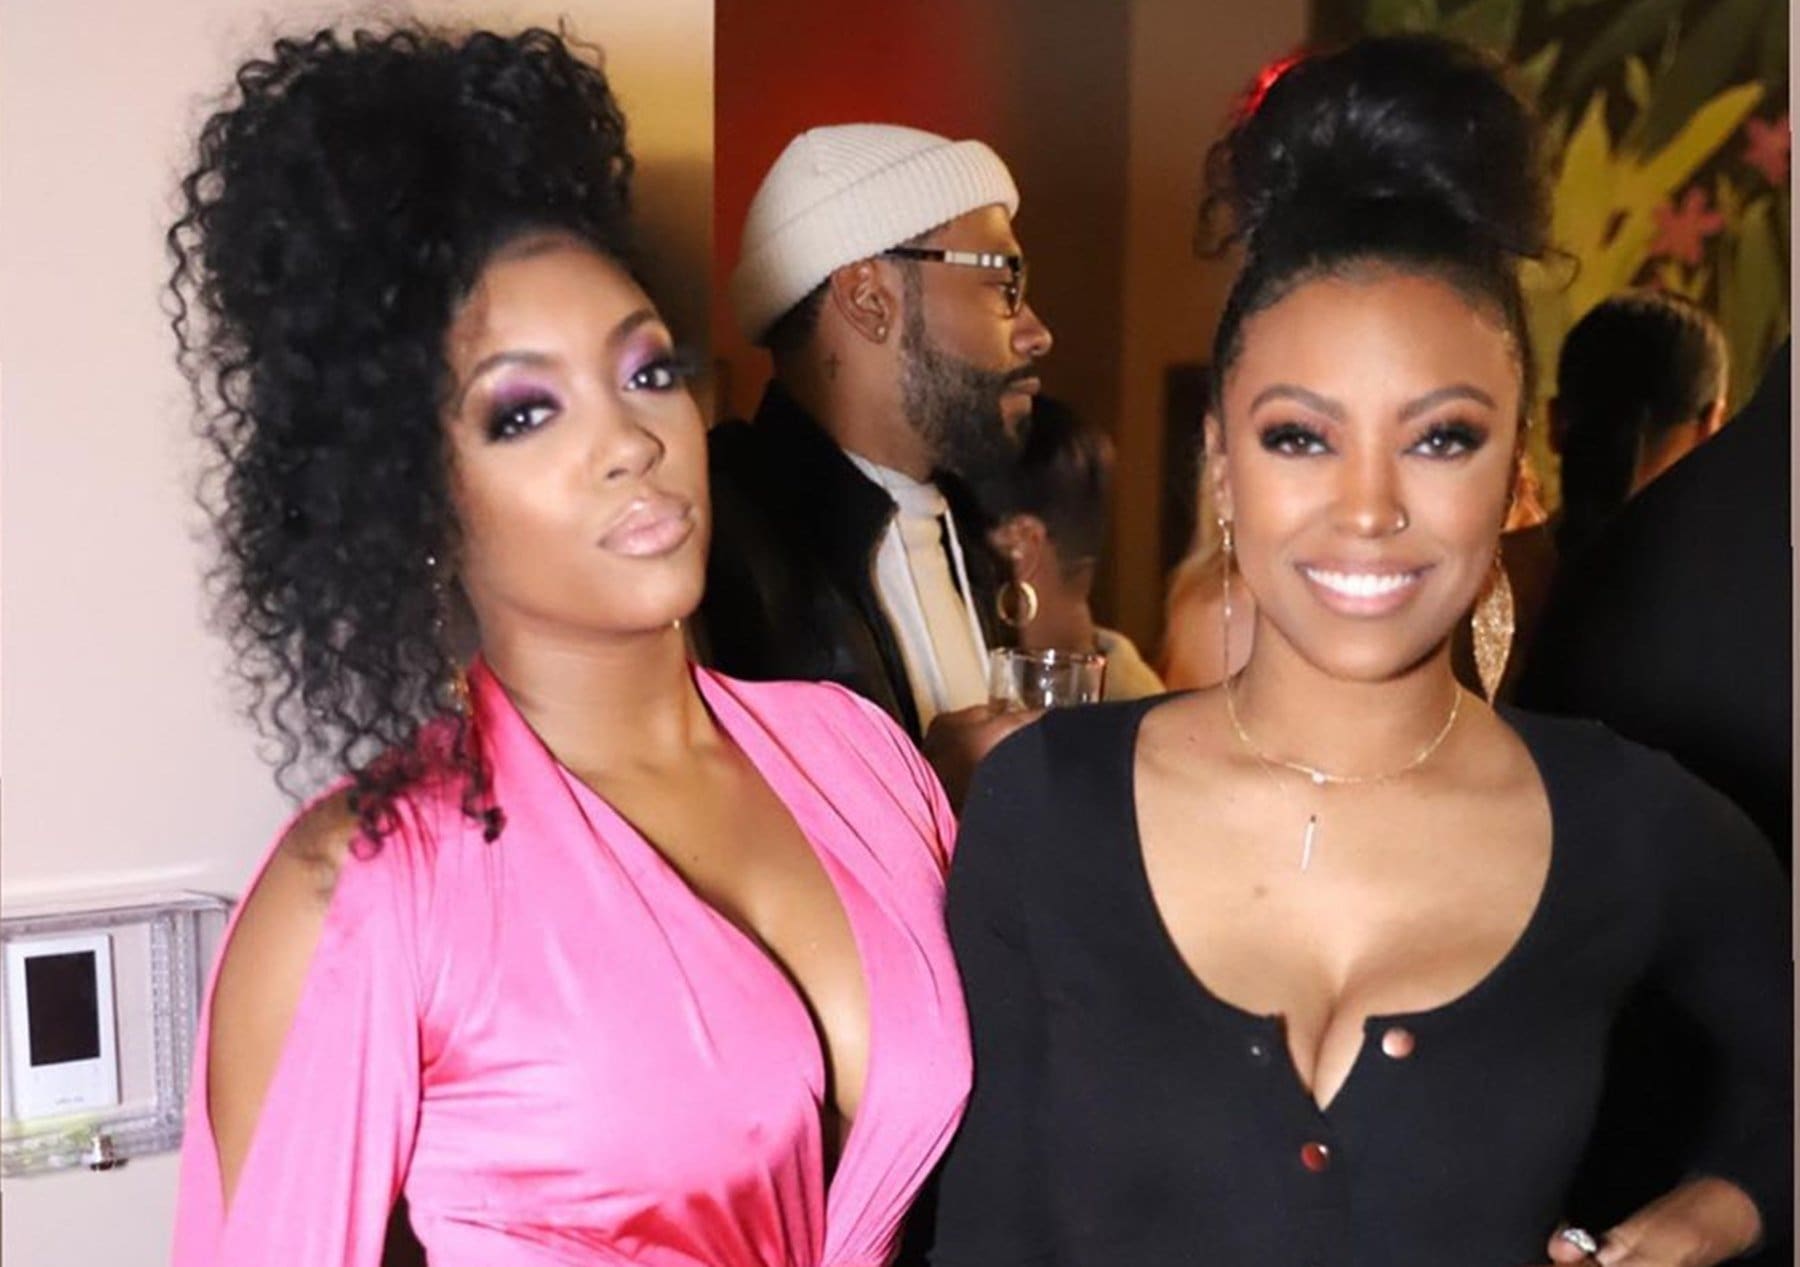 Porsha Williams Gushes Over Her Sister, Lauren Williams - See The Sweet Photo She Shared